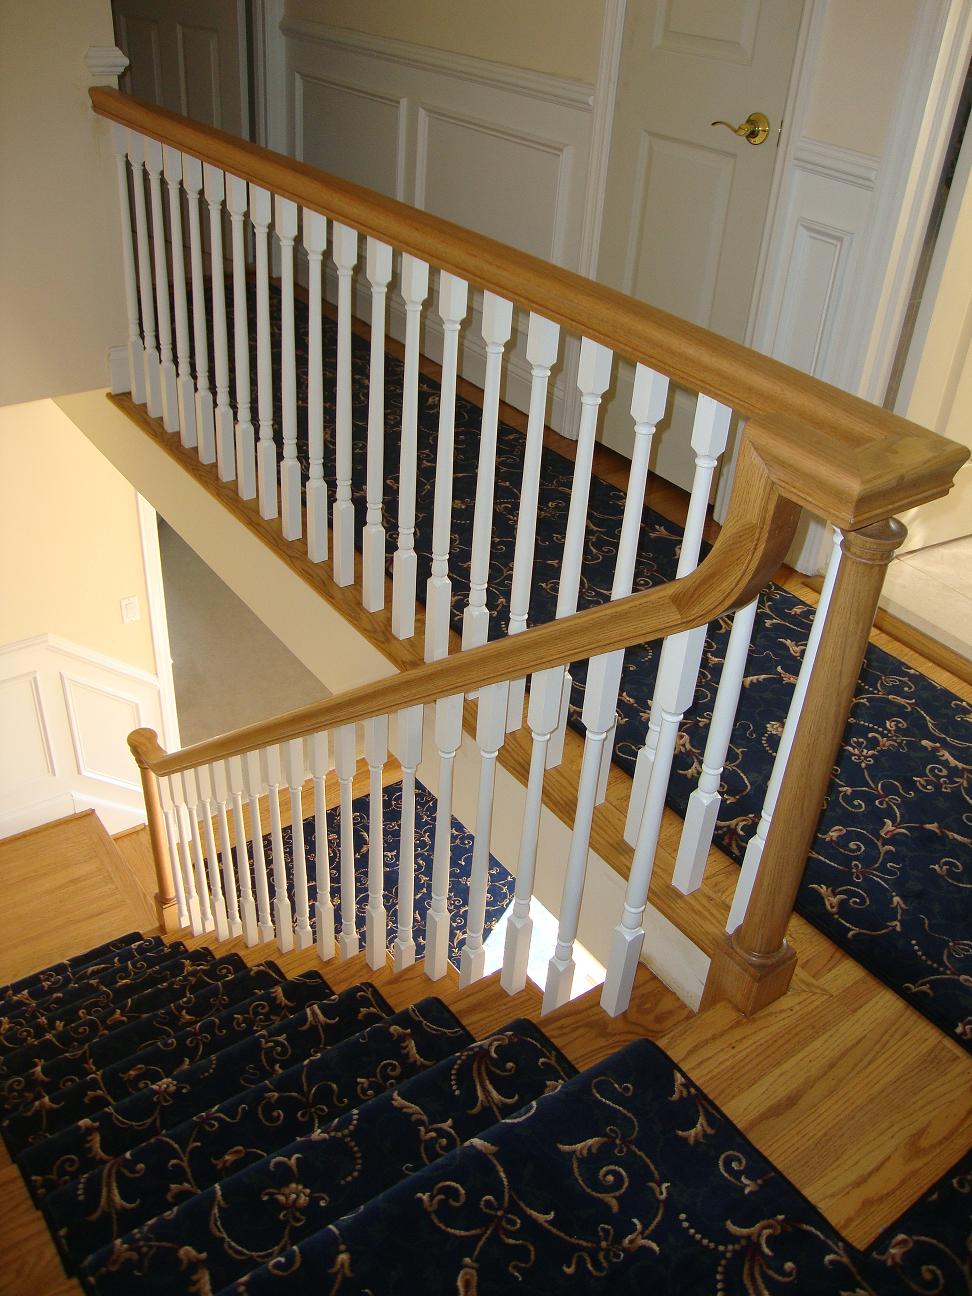 41 Best Pictures New Stair Banisters / Remodelaholic | Stair Banister Renovation Using Existing ...